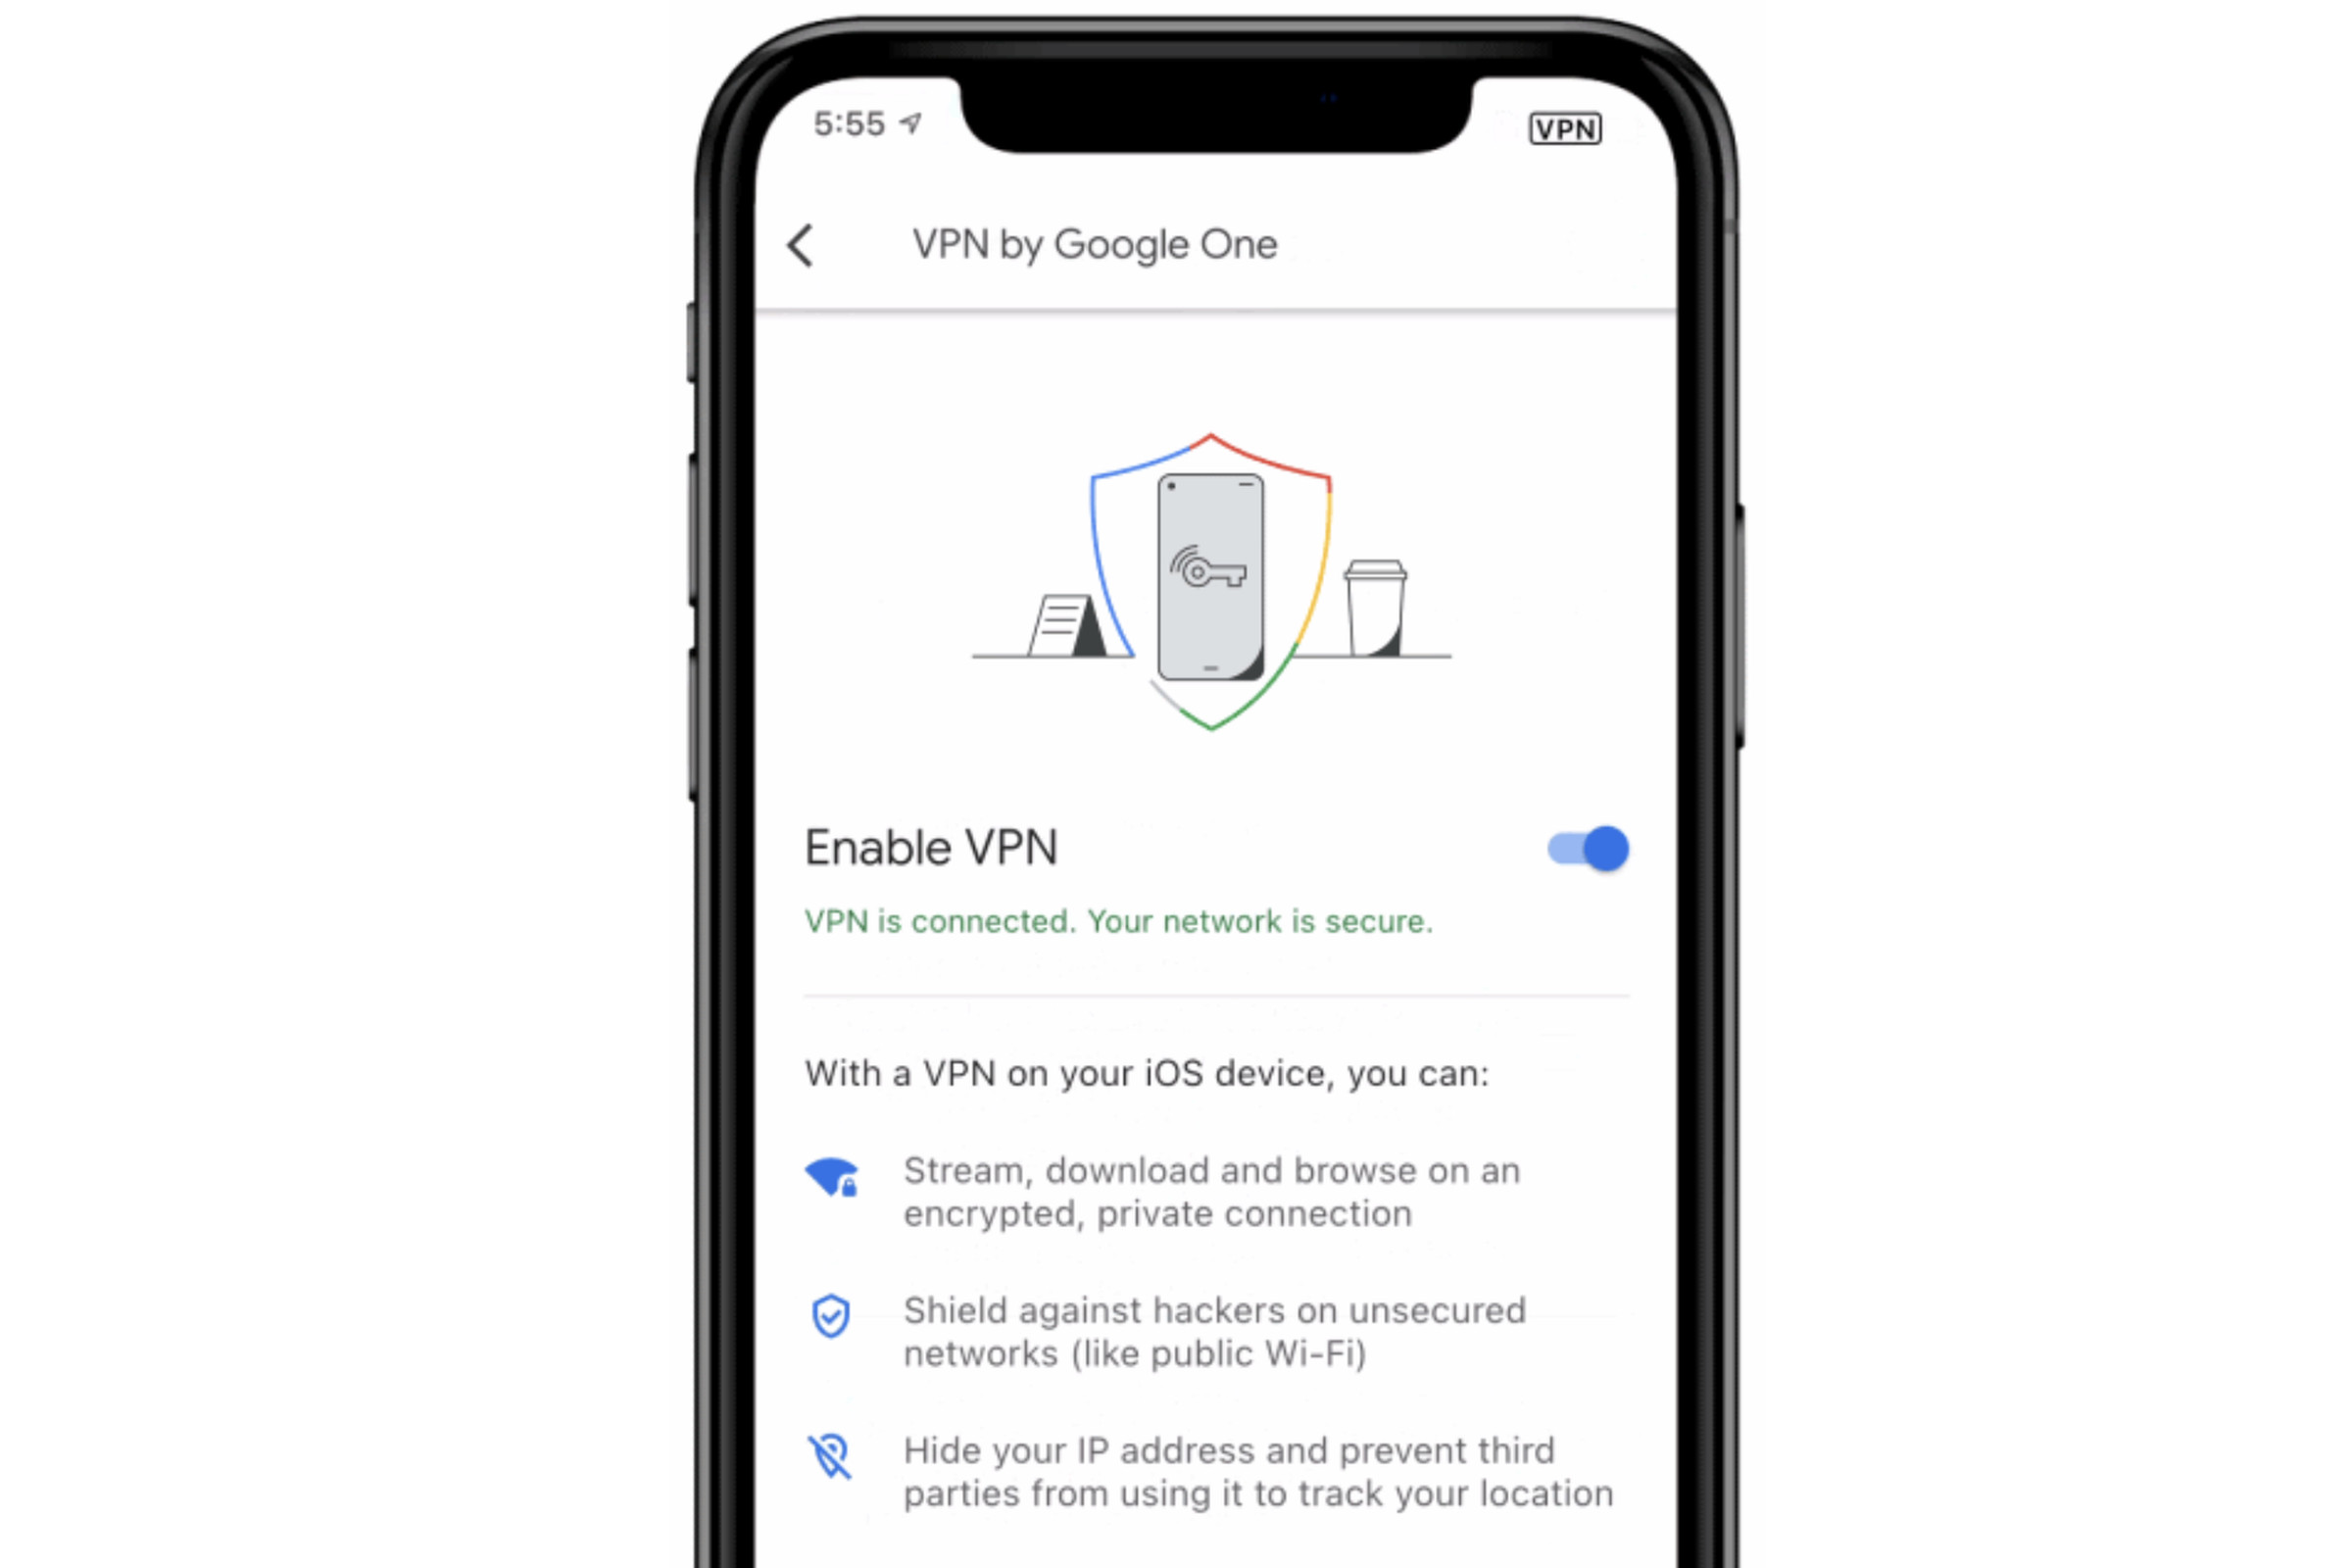 Google’s VPN is available for Premium subscribers.